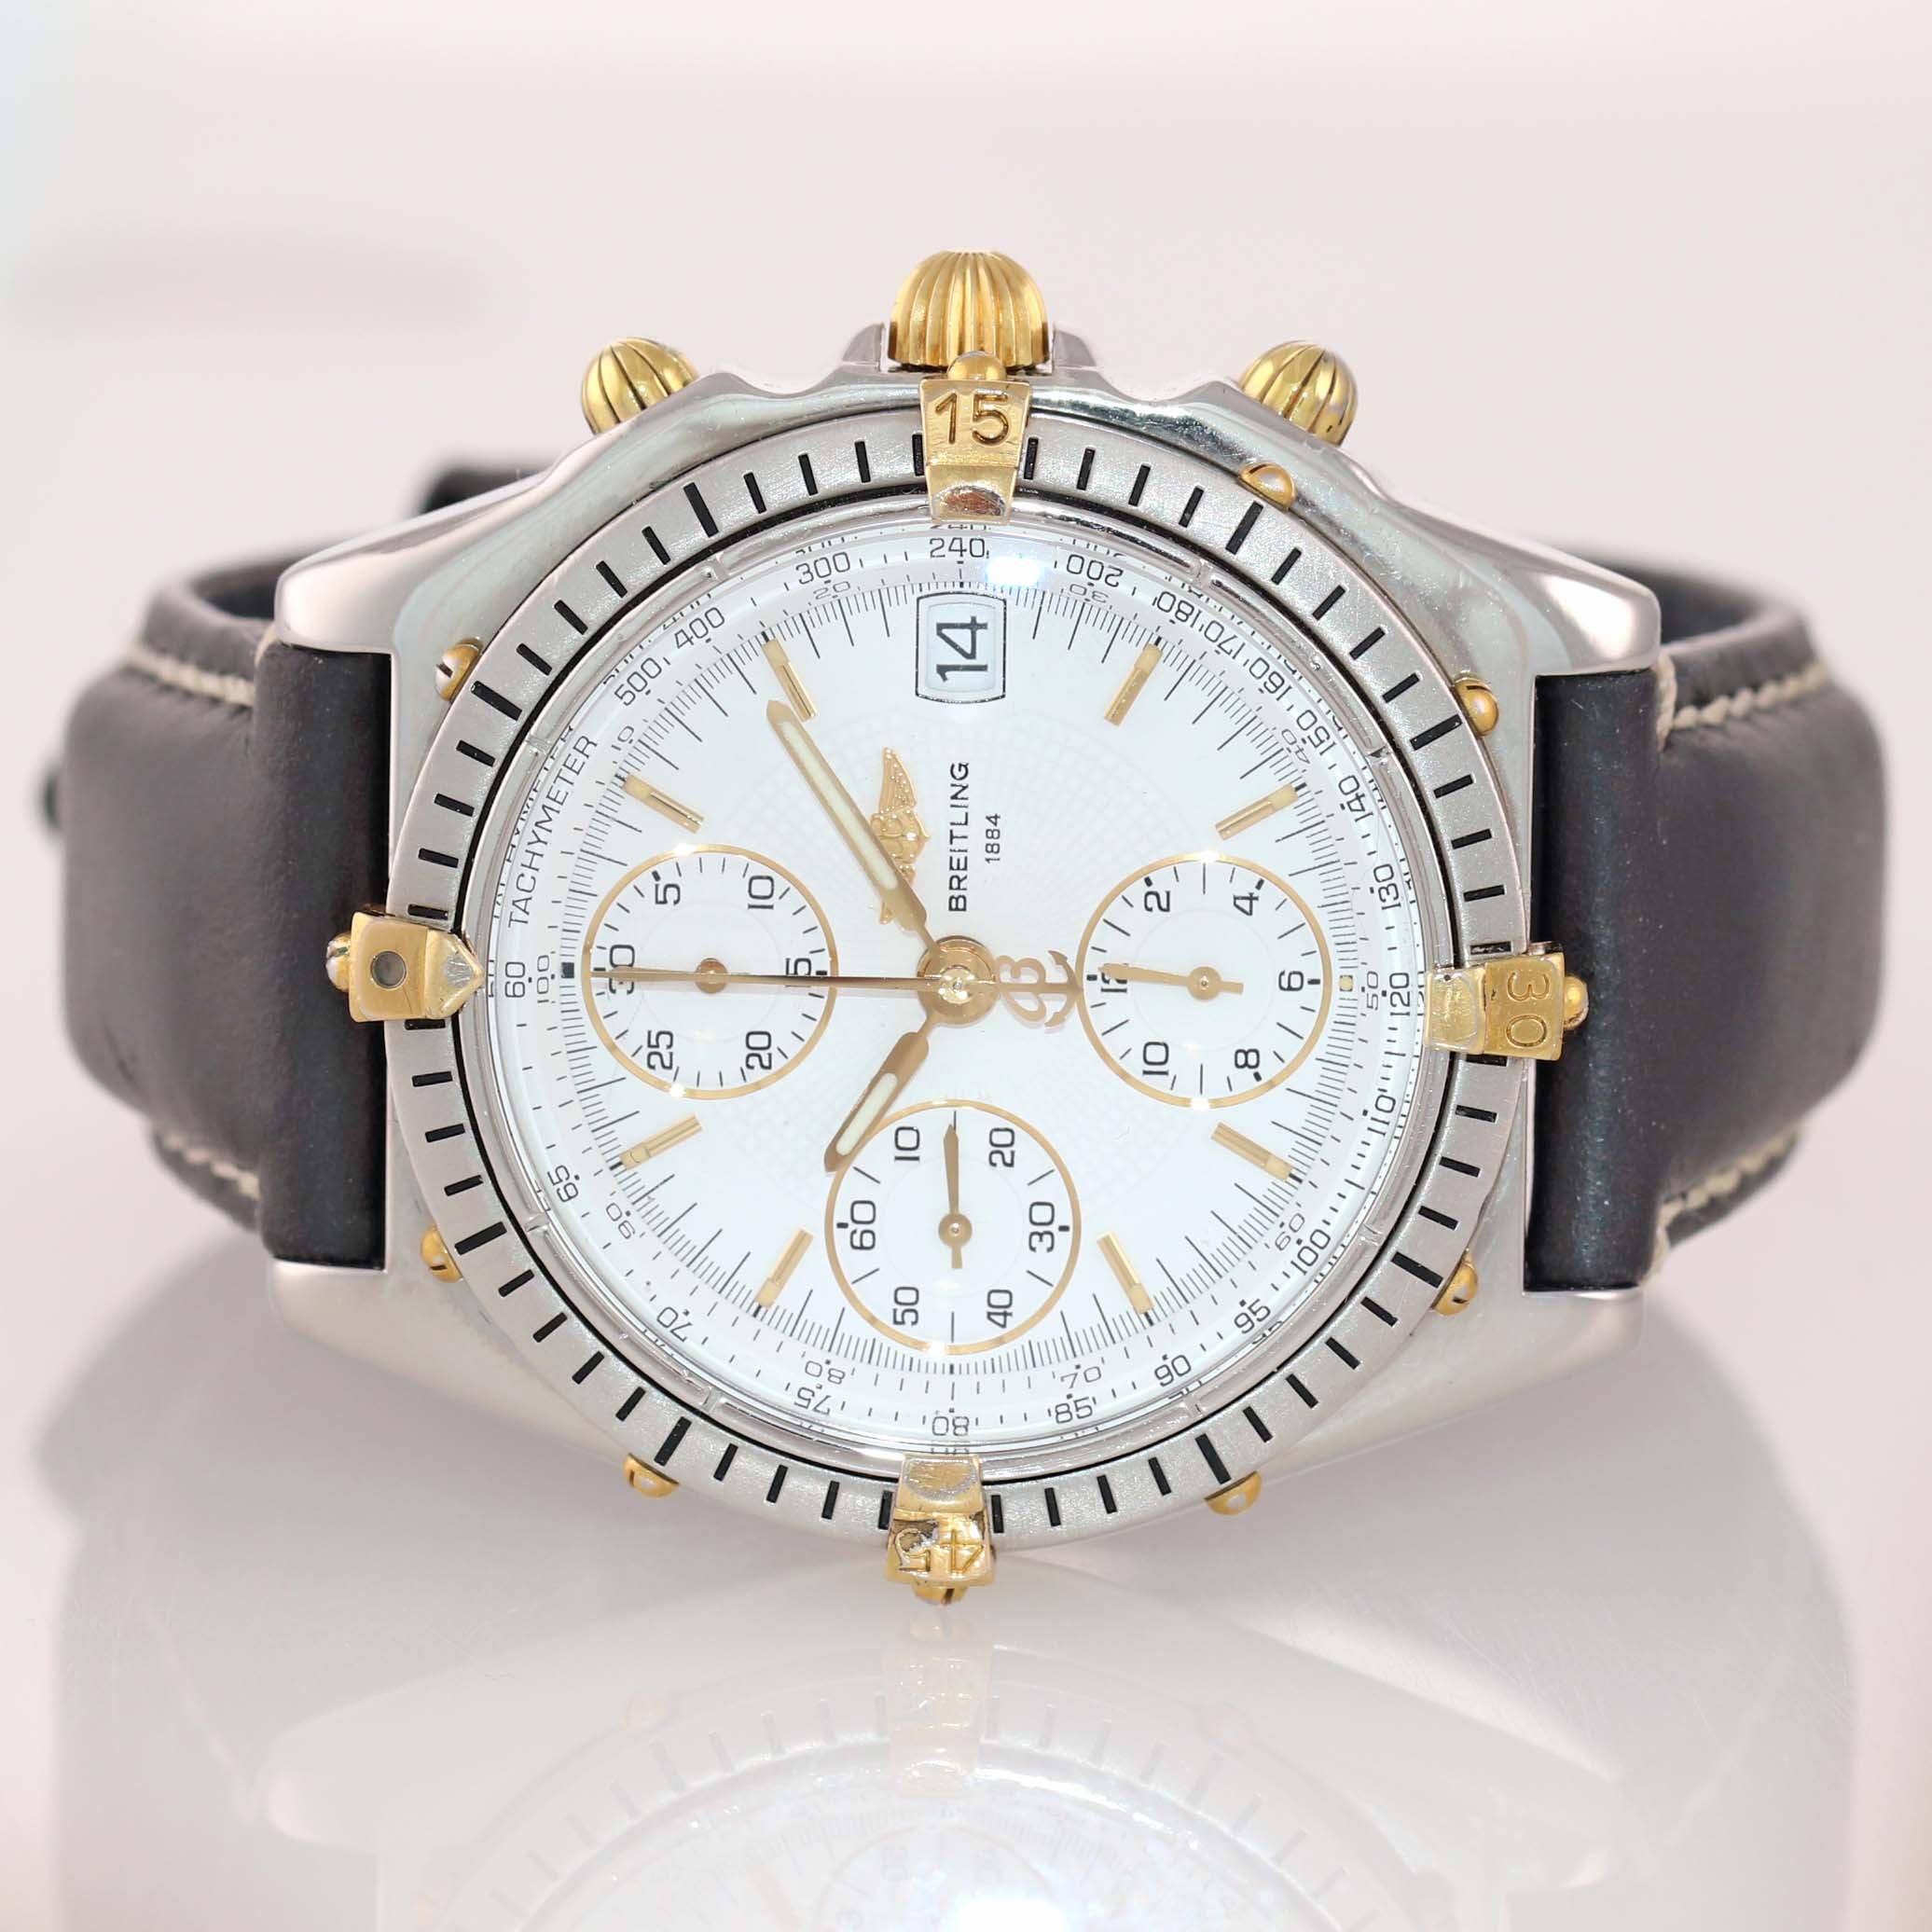 Breitling Chronomat Gold Steel 40mm Chronograph White Date Two Tone Watch B13050